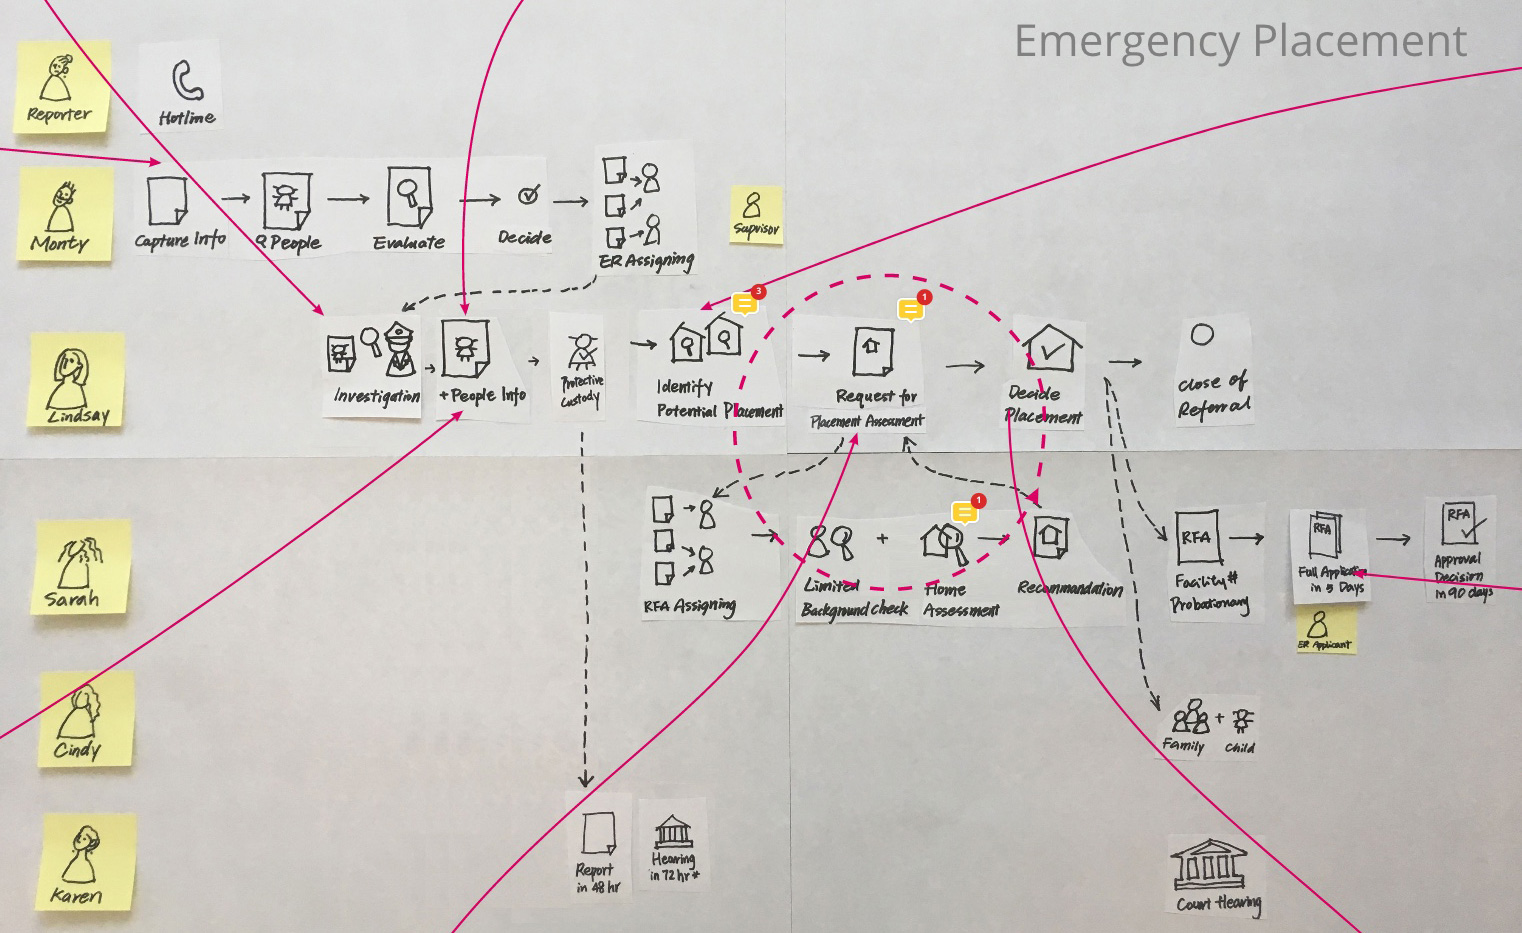 Sketch of the Emergency Placement by Liz